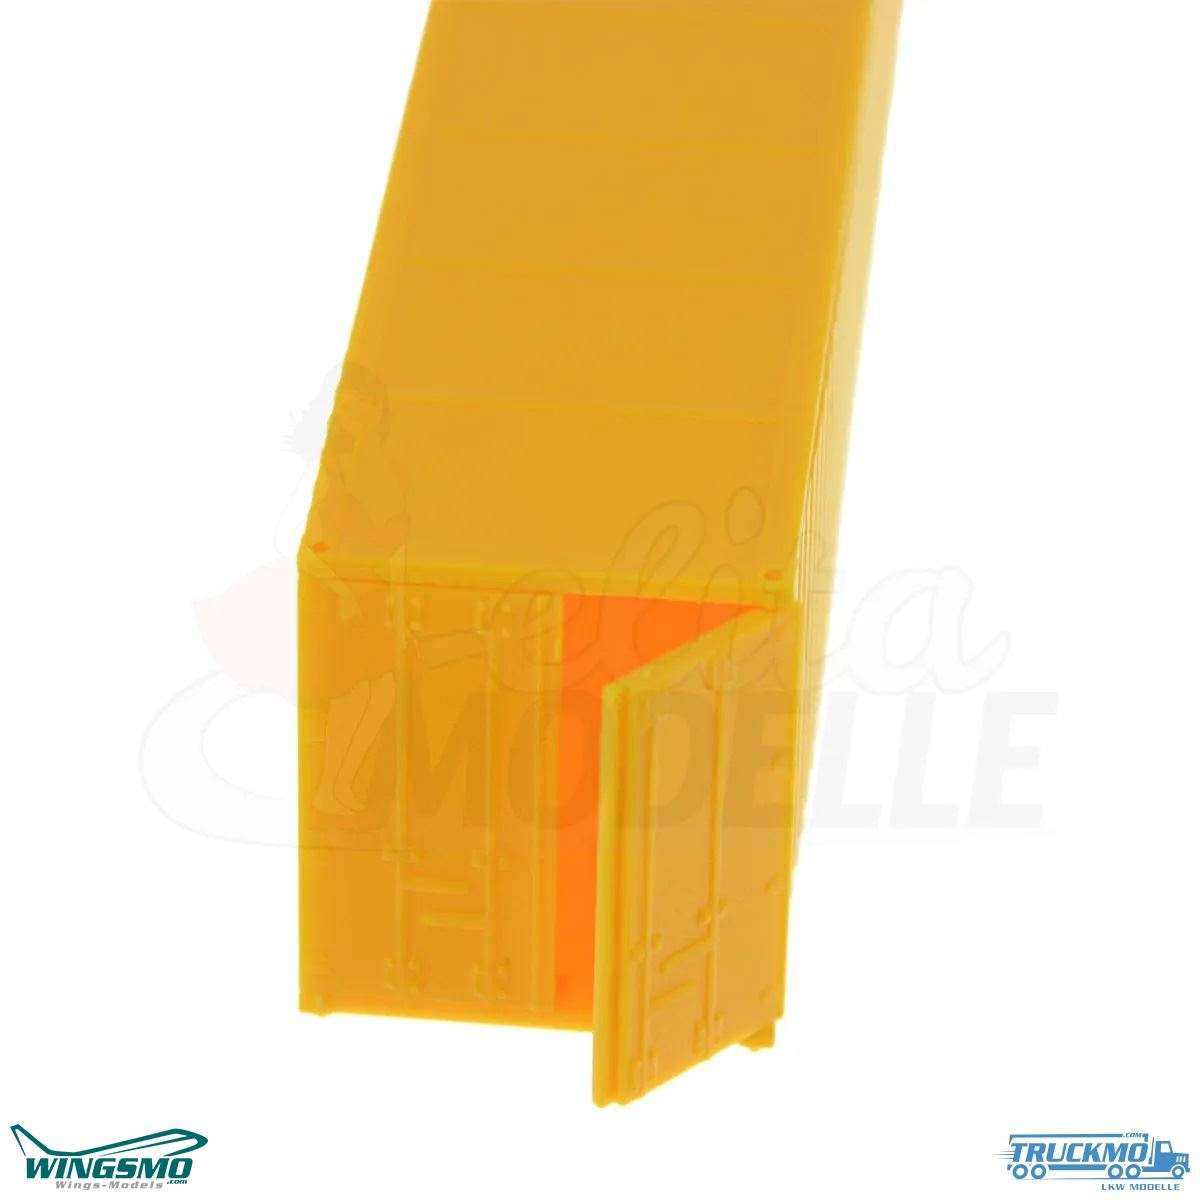 Elita Farben Accessories H0 container 40FT. Yellow kit